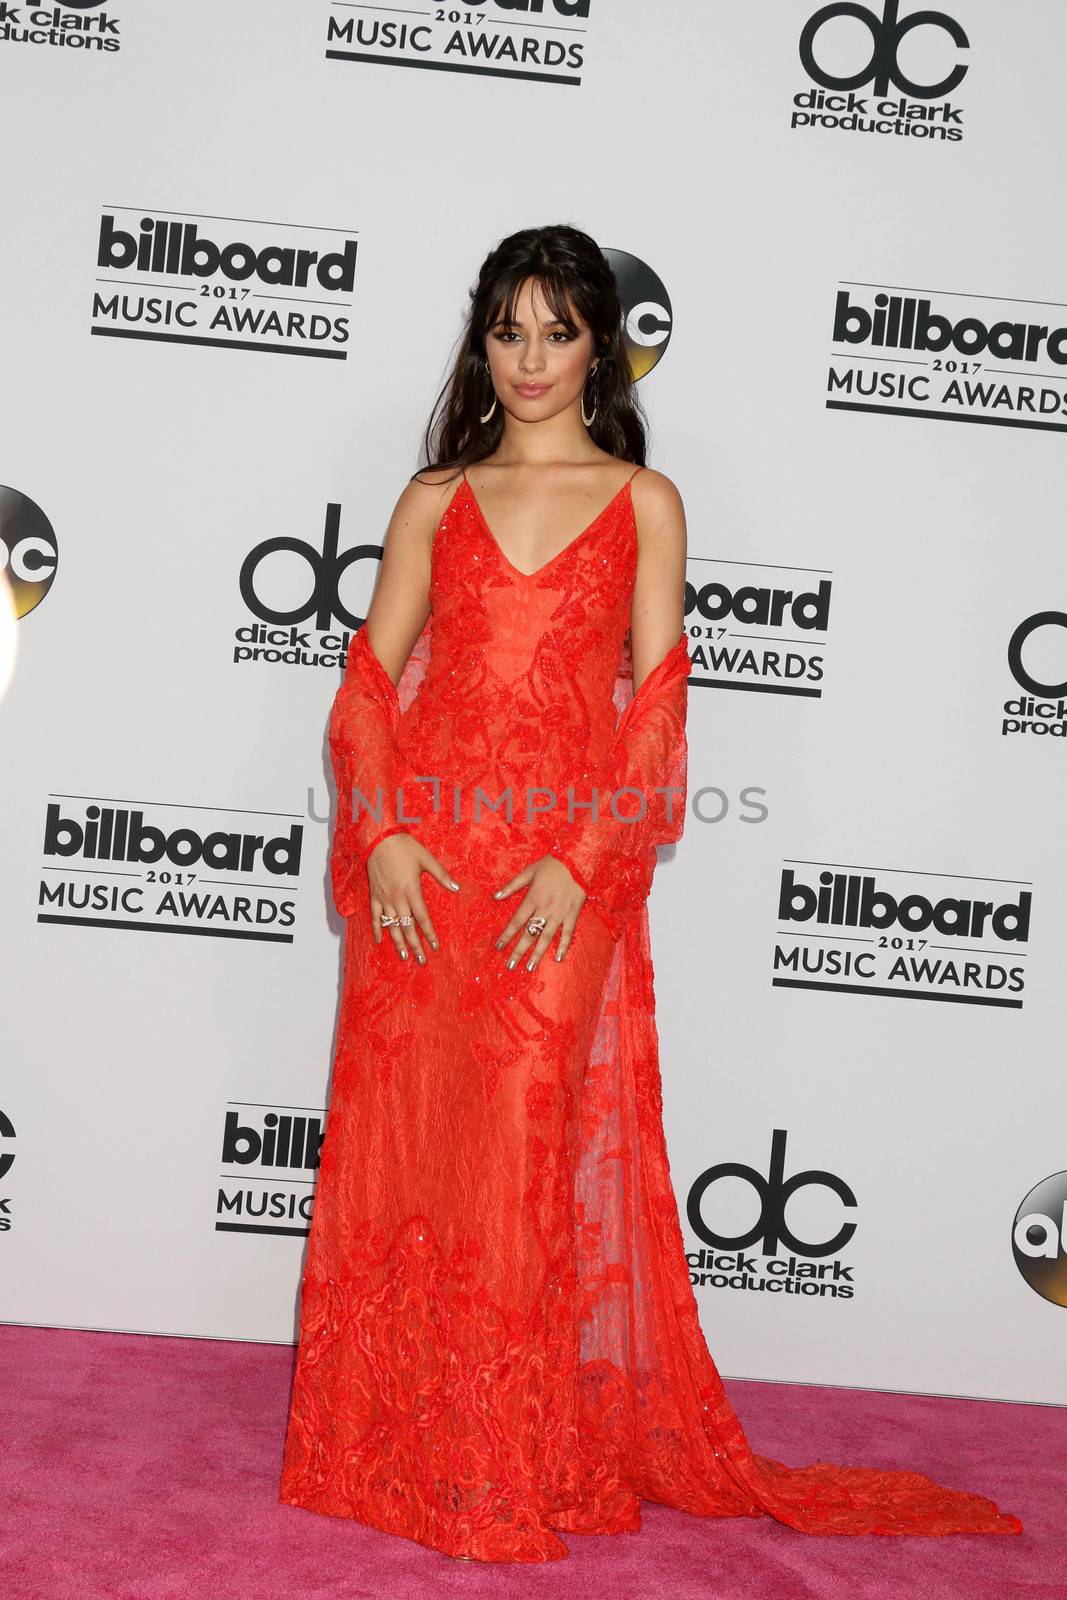 Camila Cabello
at the 2017 Billboard Awards Press Room, T-Mobile Arena, Las Vegas, NV 05-21-17/ImageCollect by ImageCollect